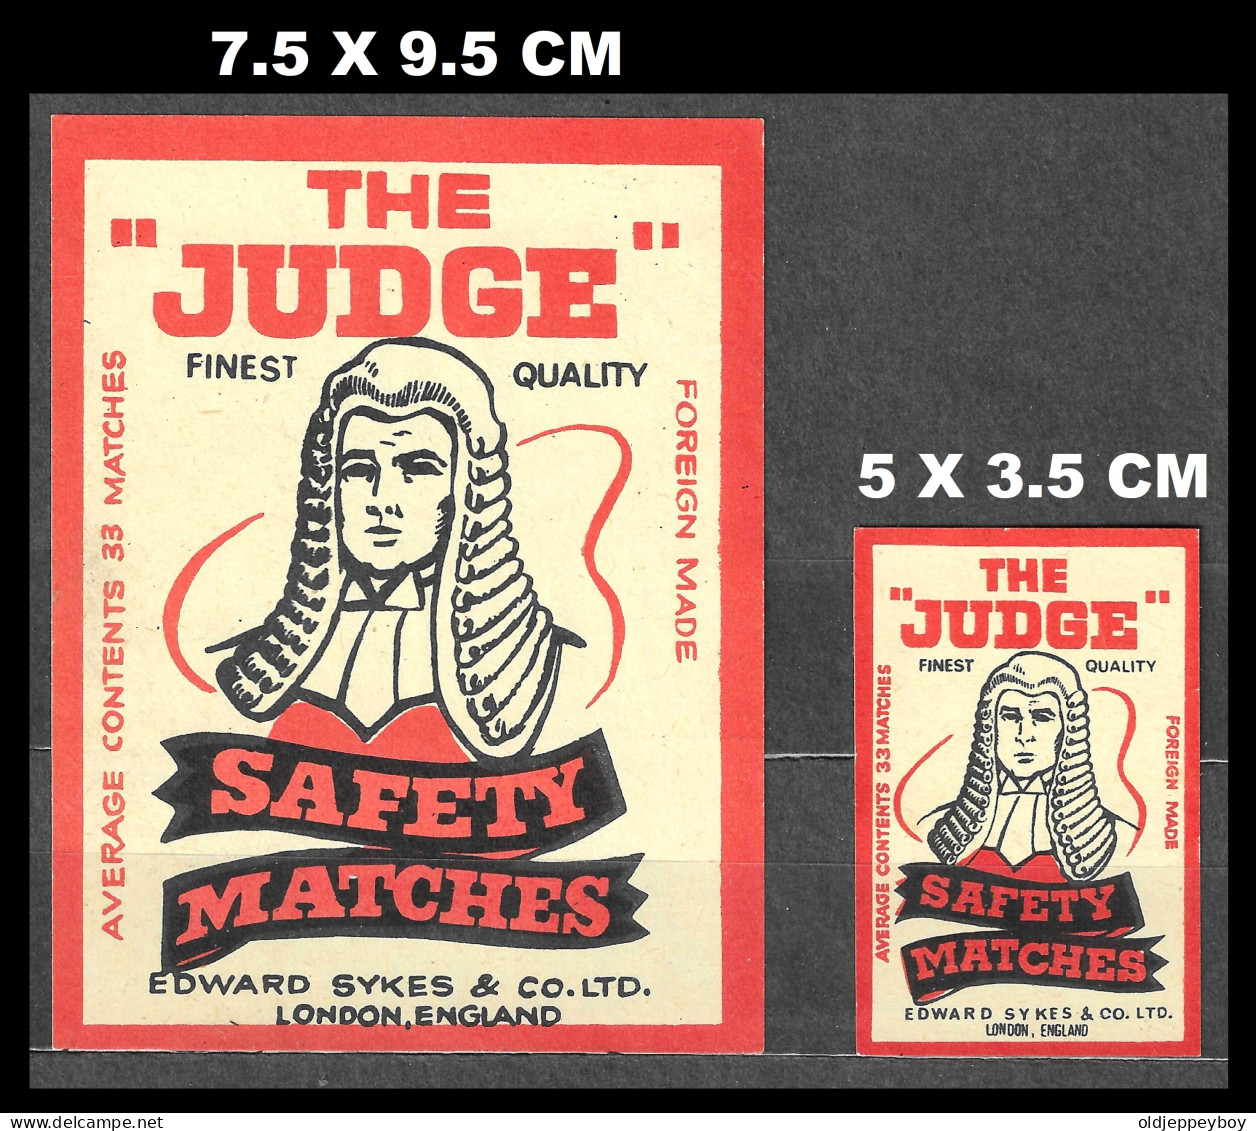 ENGLAND  MATCHBOX LABEL "THE JUDGE" EDWARD SYKES & CO.LTD LONDON SET OF 2 DIF SIZES SEE SCAN FOR SIZES  LARGE RARE - Matchbox Labels